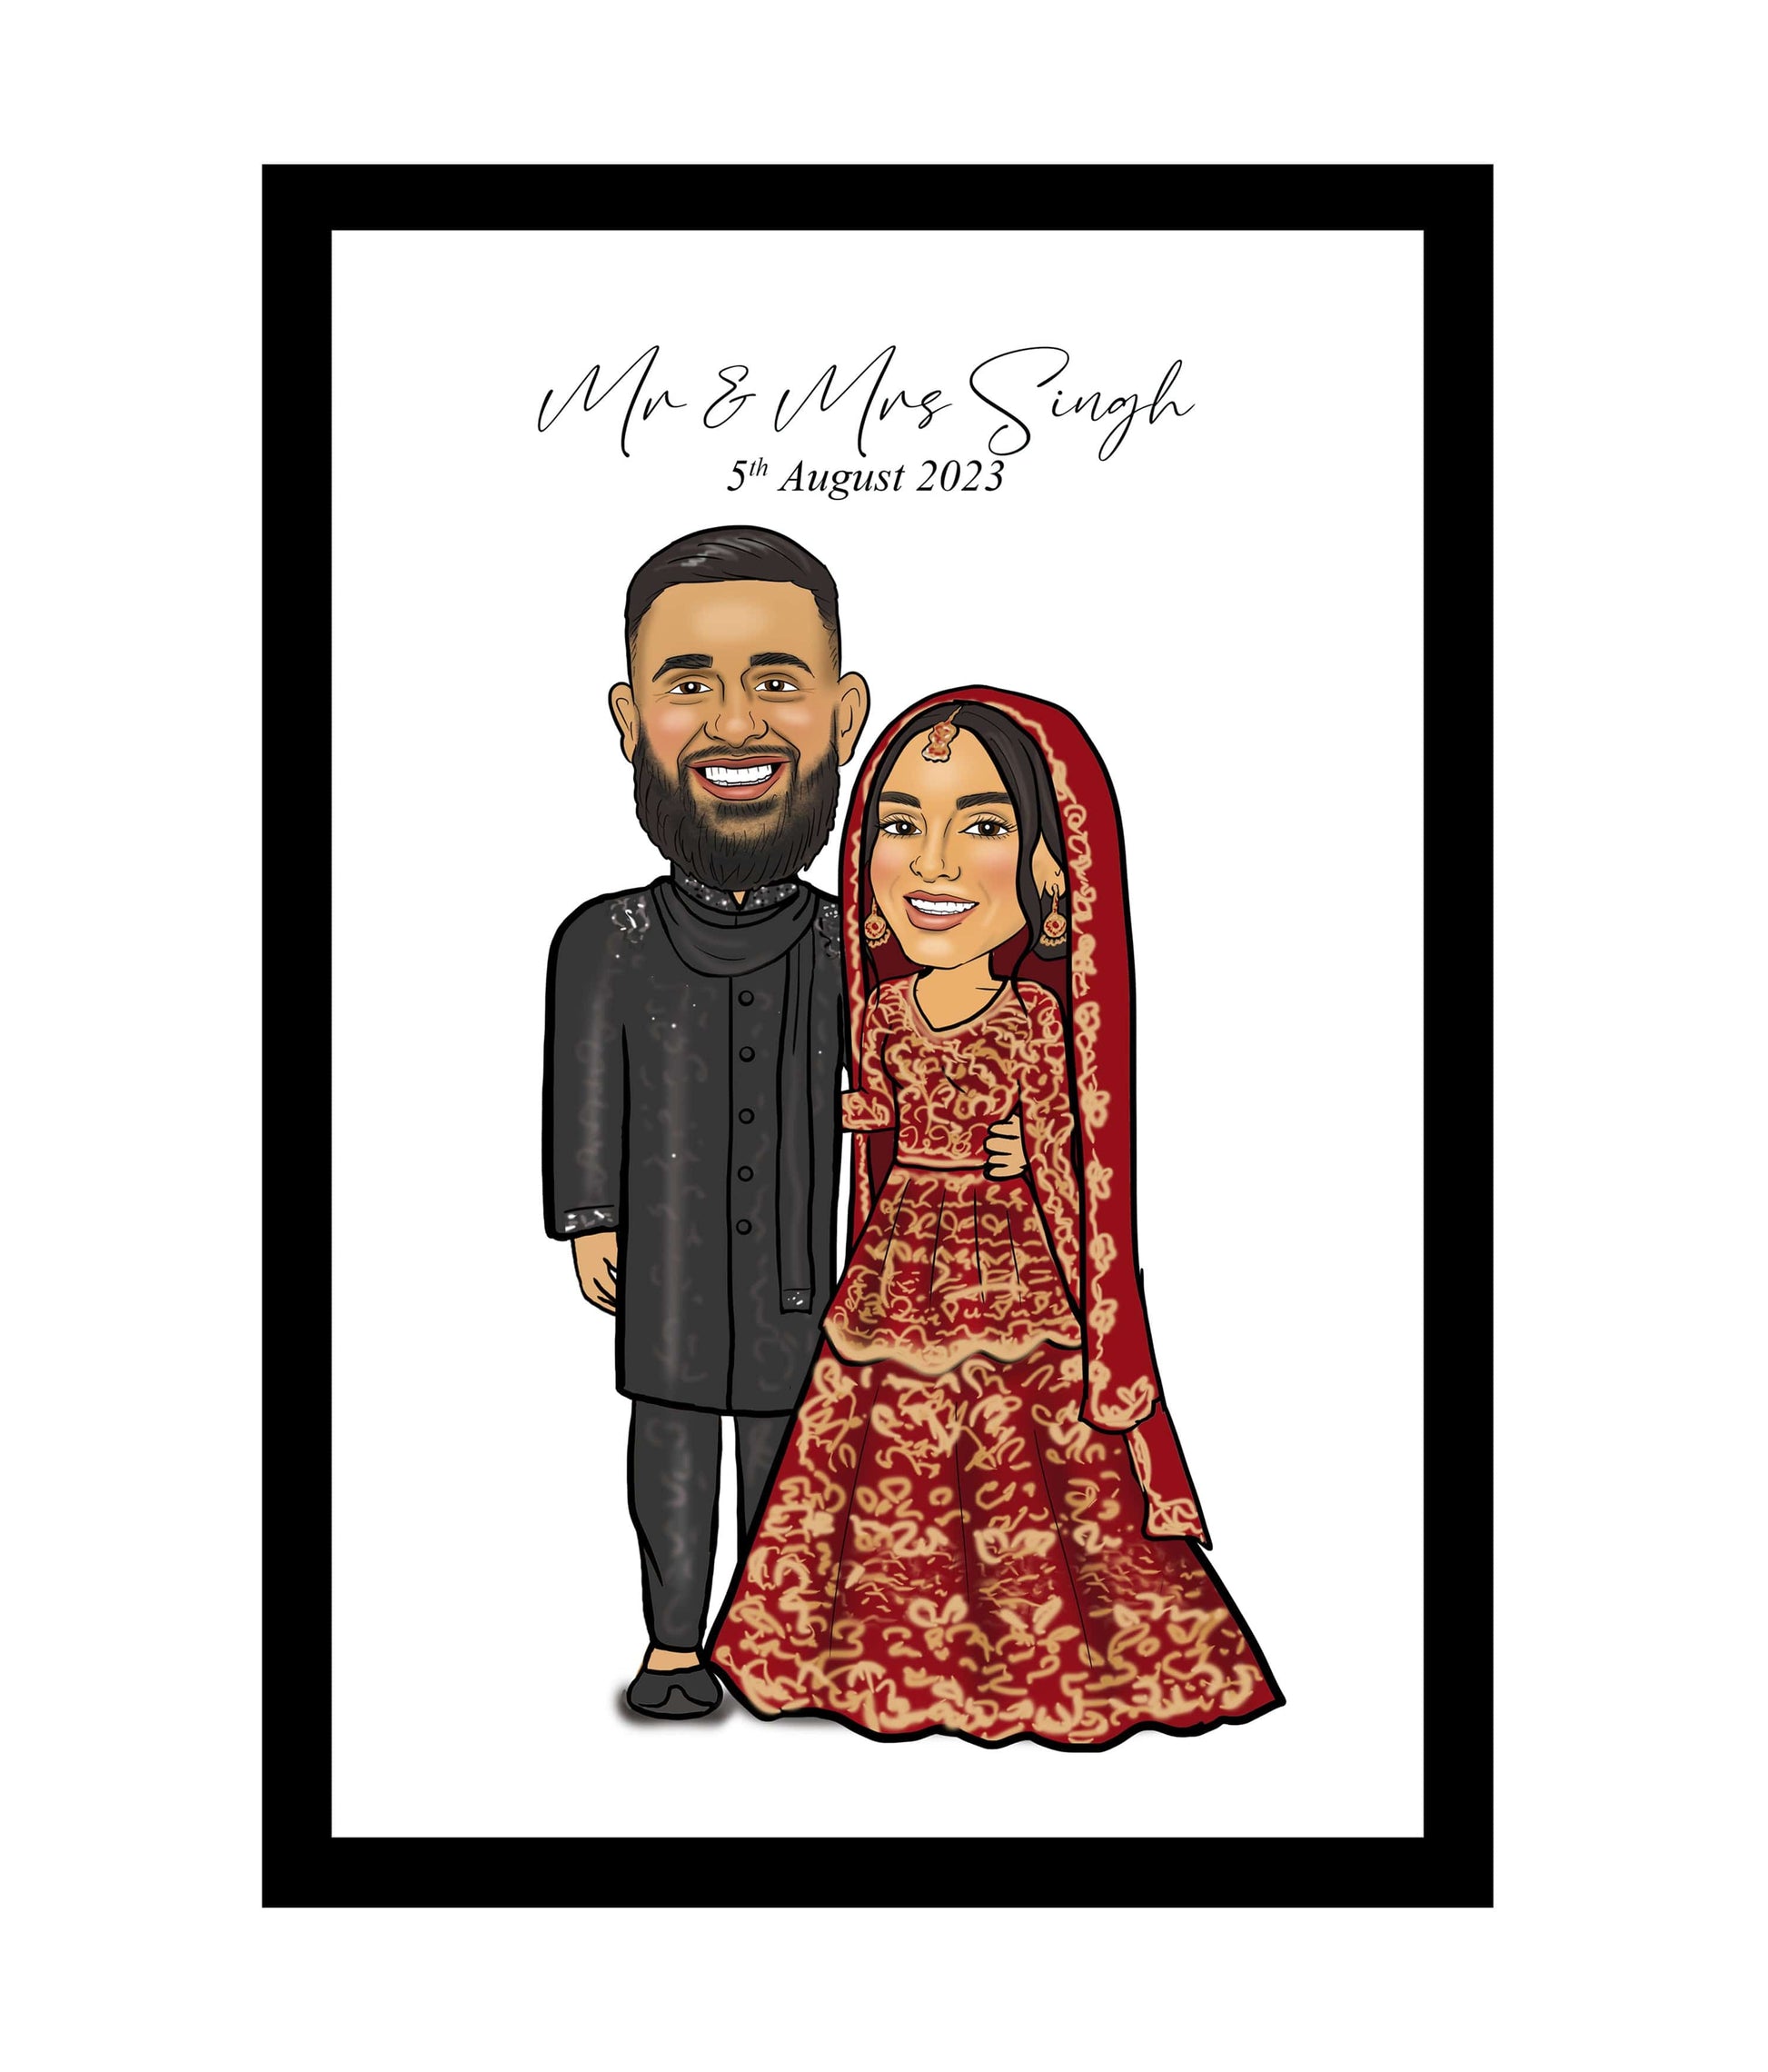 Indian Wedding Caricature | Wedding Caricature | Steph's Sketches